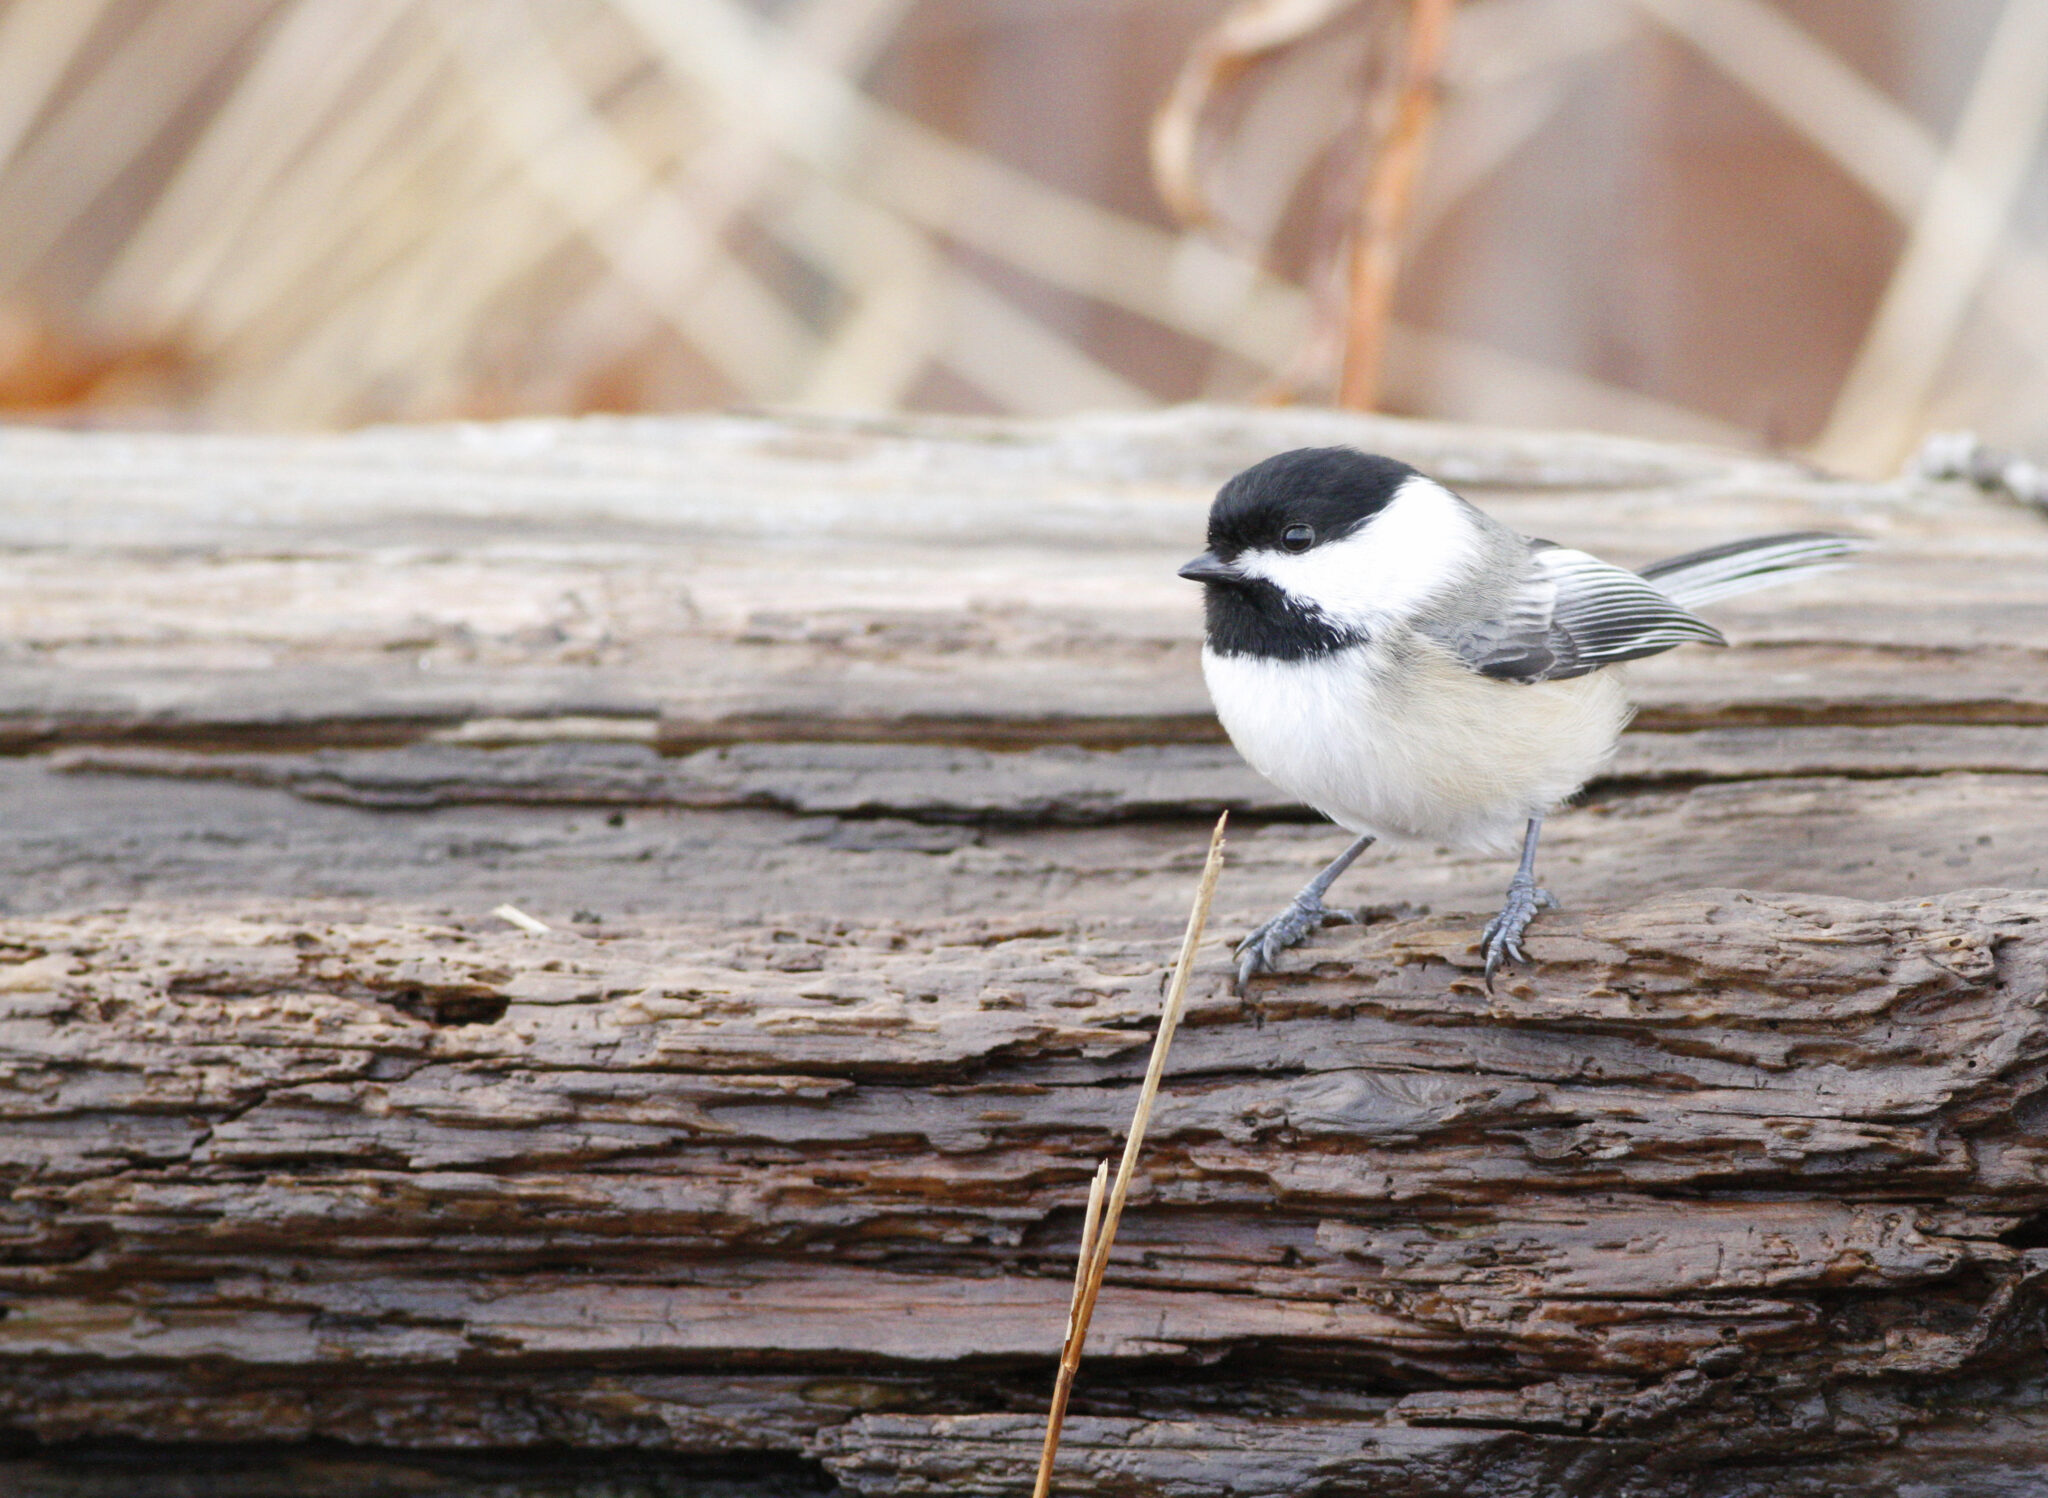 Black-capped chickadee perched on a log